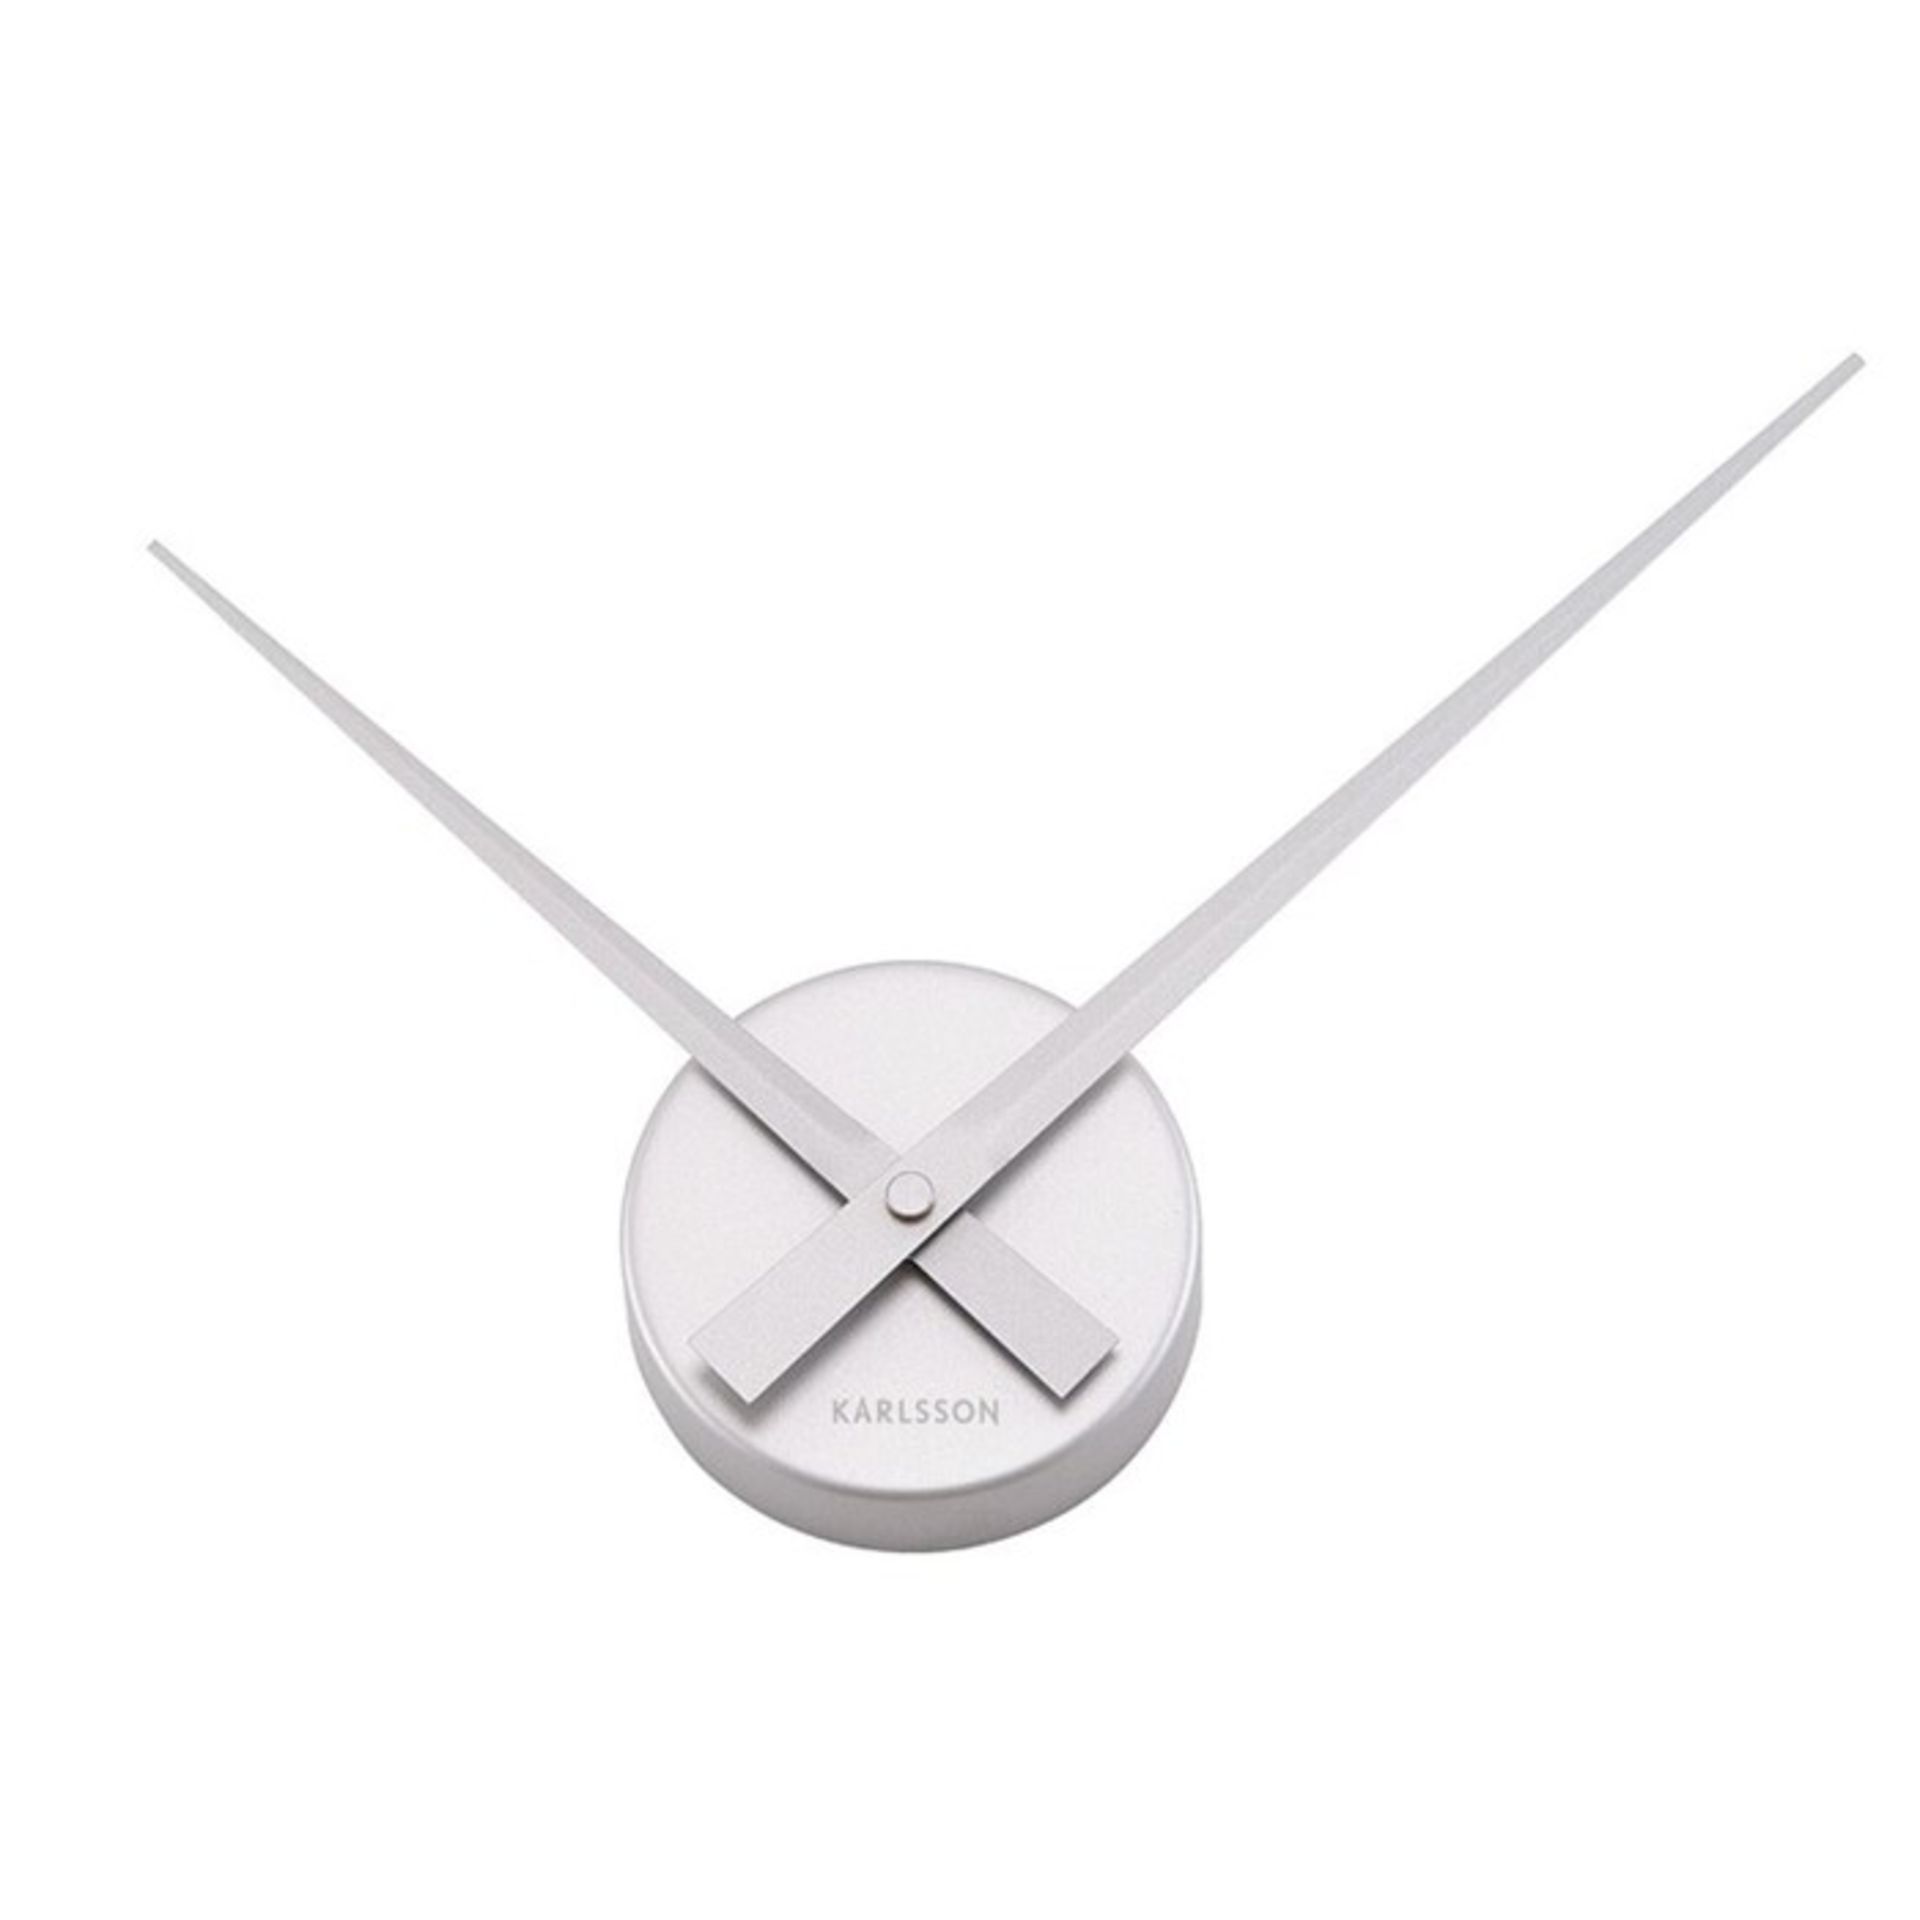 Karlsson,Little Big Time 46cm Wall Clock RRP £27.99 (OXE1274 - 17635/26) 2D